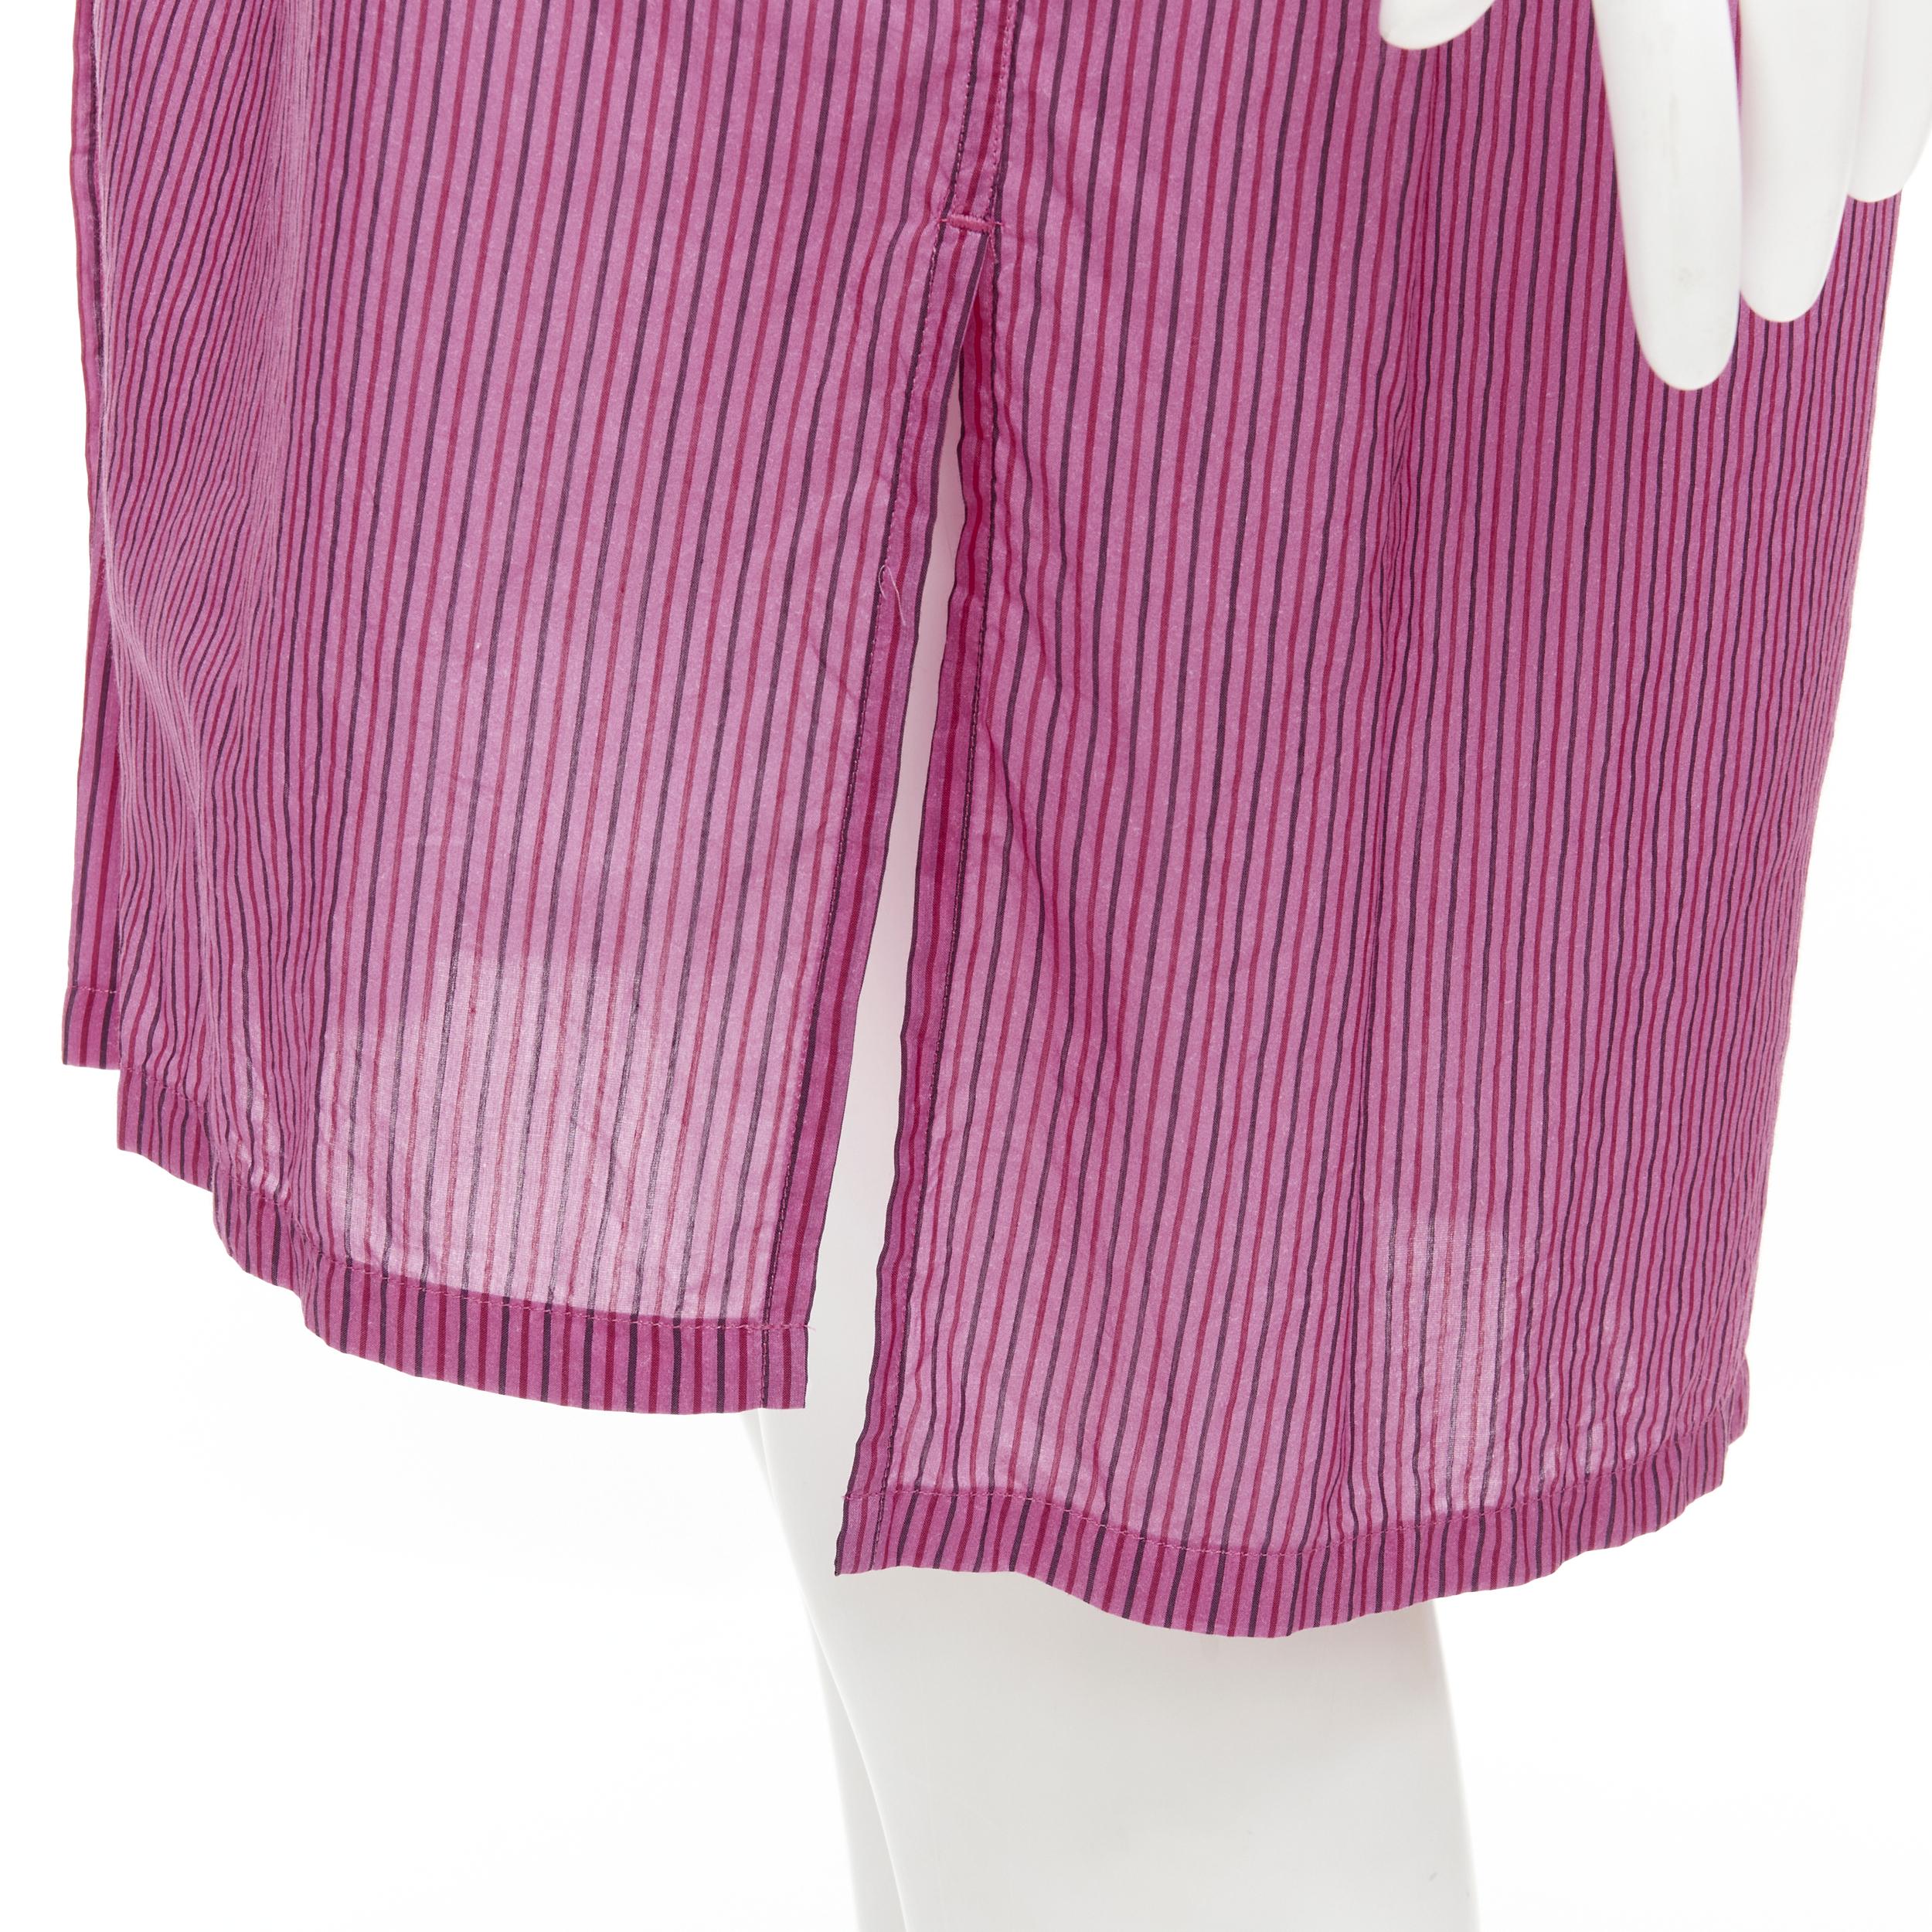 DRIES VAN NOTEN pinstripe cotton cupro pink hem shirt dress FR34 XS 
Reference: CELG/A00165 
Brand: Dries Van Noten 
Designer: Dries Van Noten 
Material: Cotton 
Color: Pink 
Pattern: Striped 
Closure: Button 
Extra Detail: Breast pocket. 
Made in: